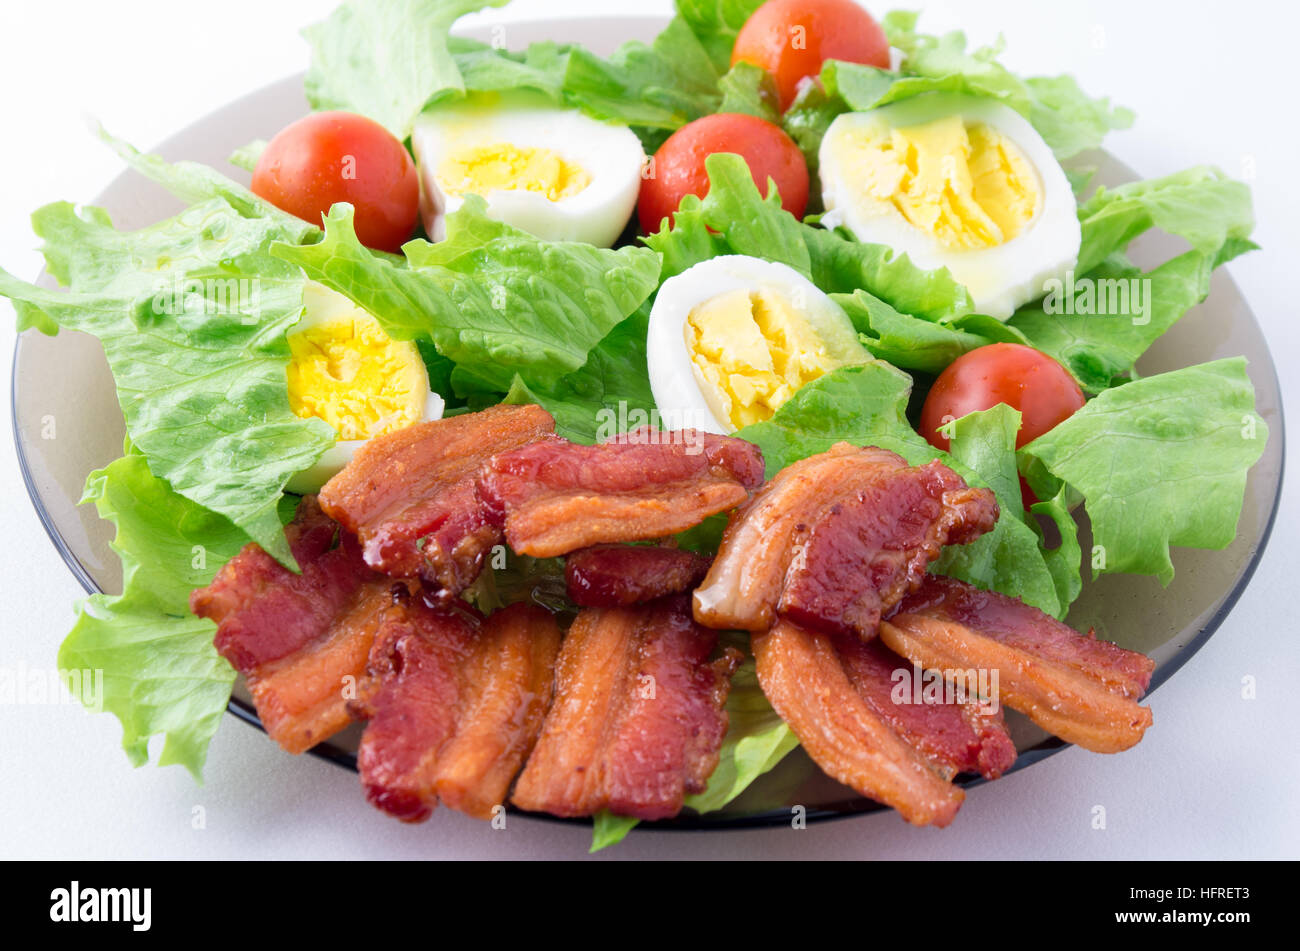 Shredded lettuce, cherry tomatoes, bacon and boiled eggs on a plate close-up with shallow depth of field Stock Photo